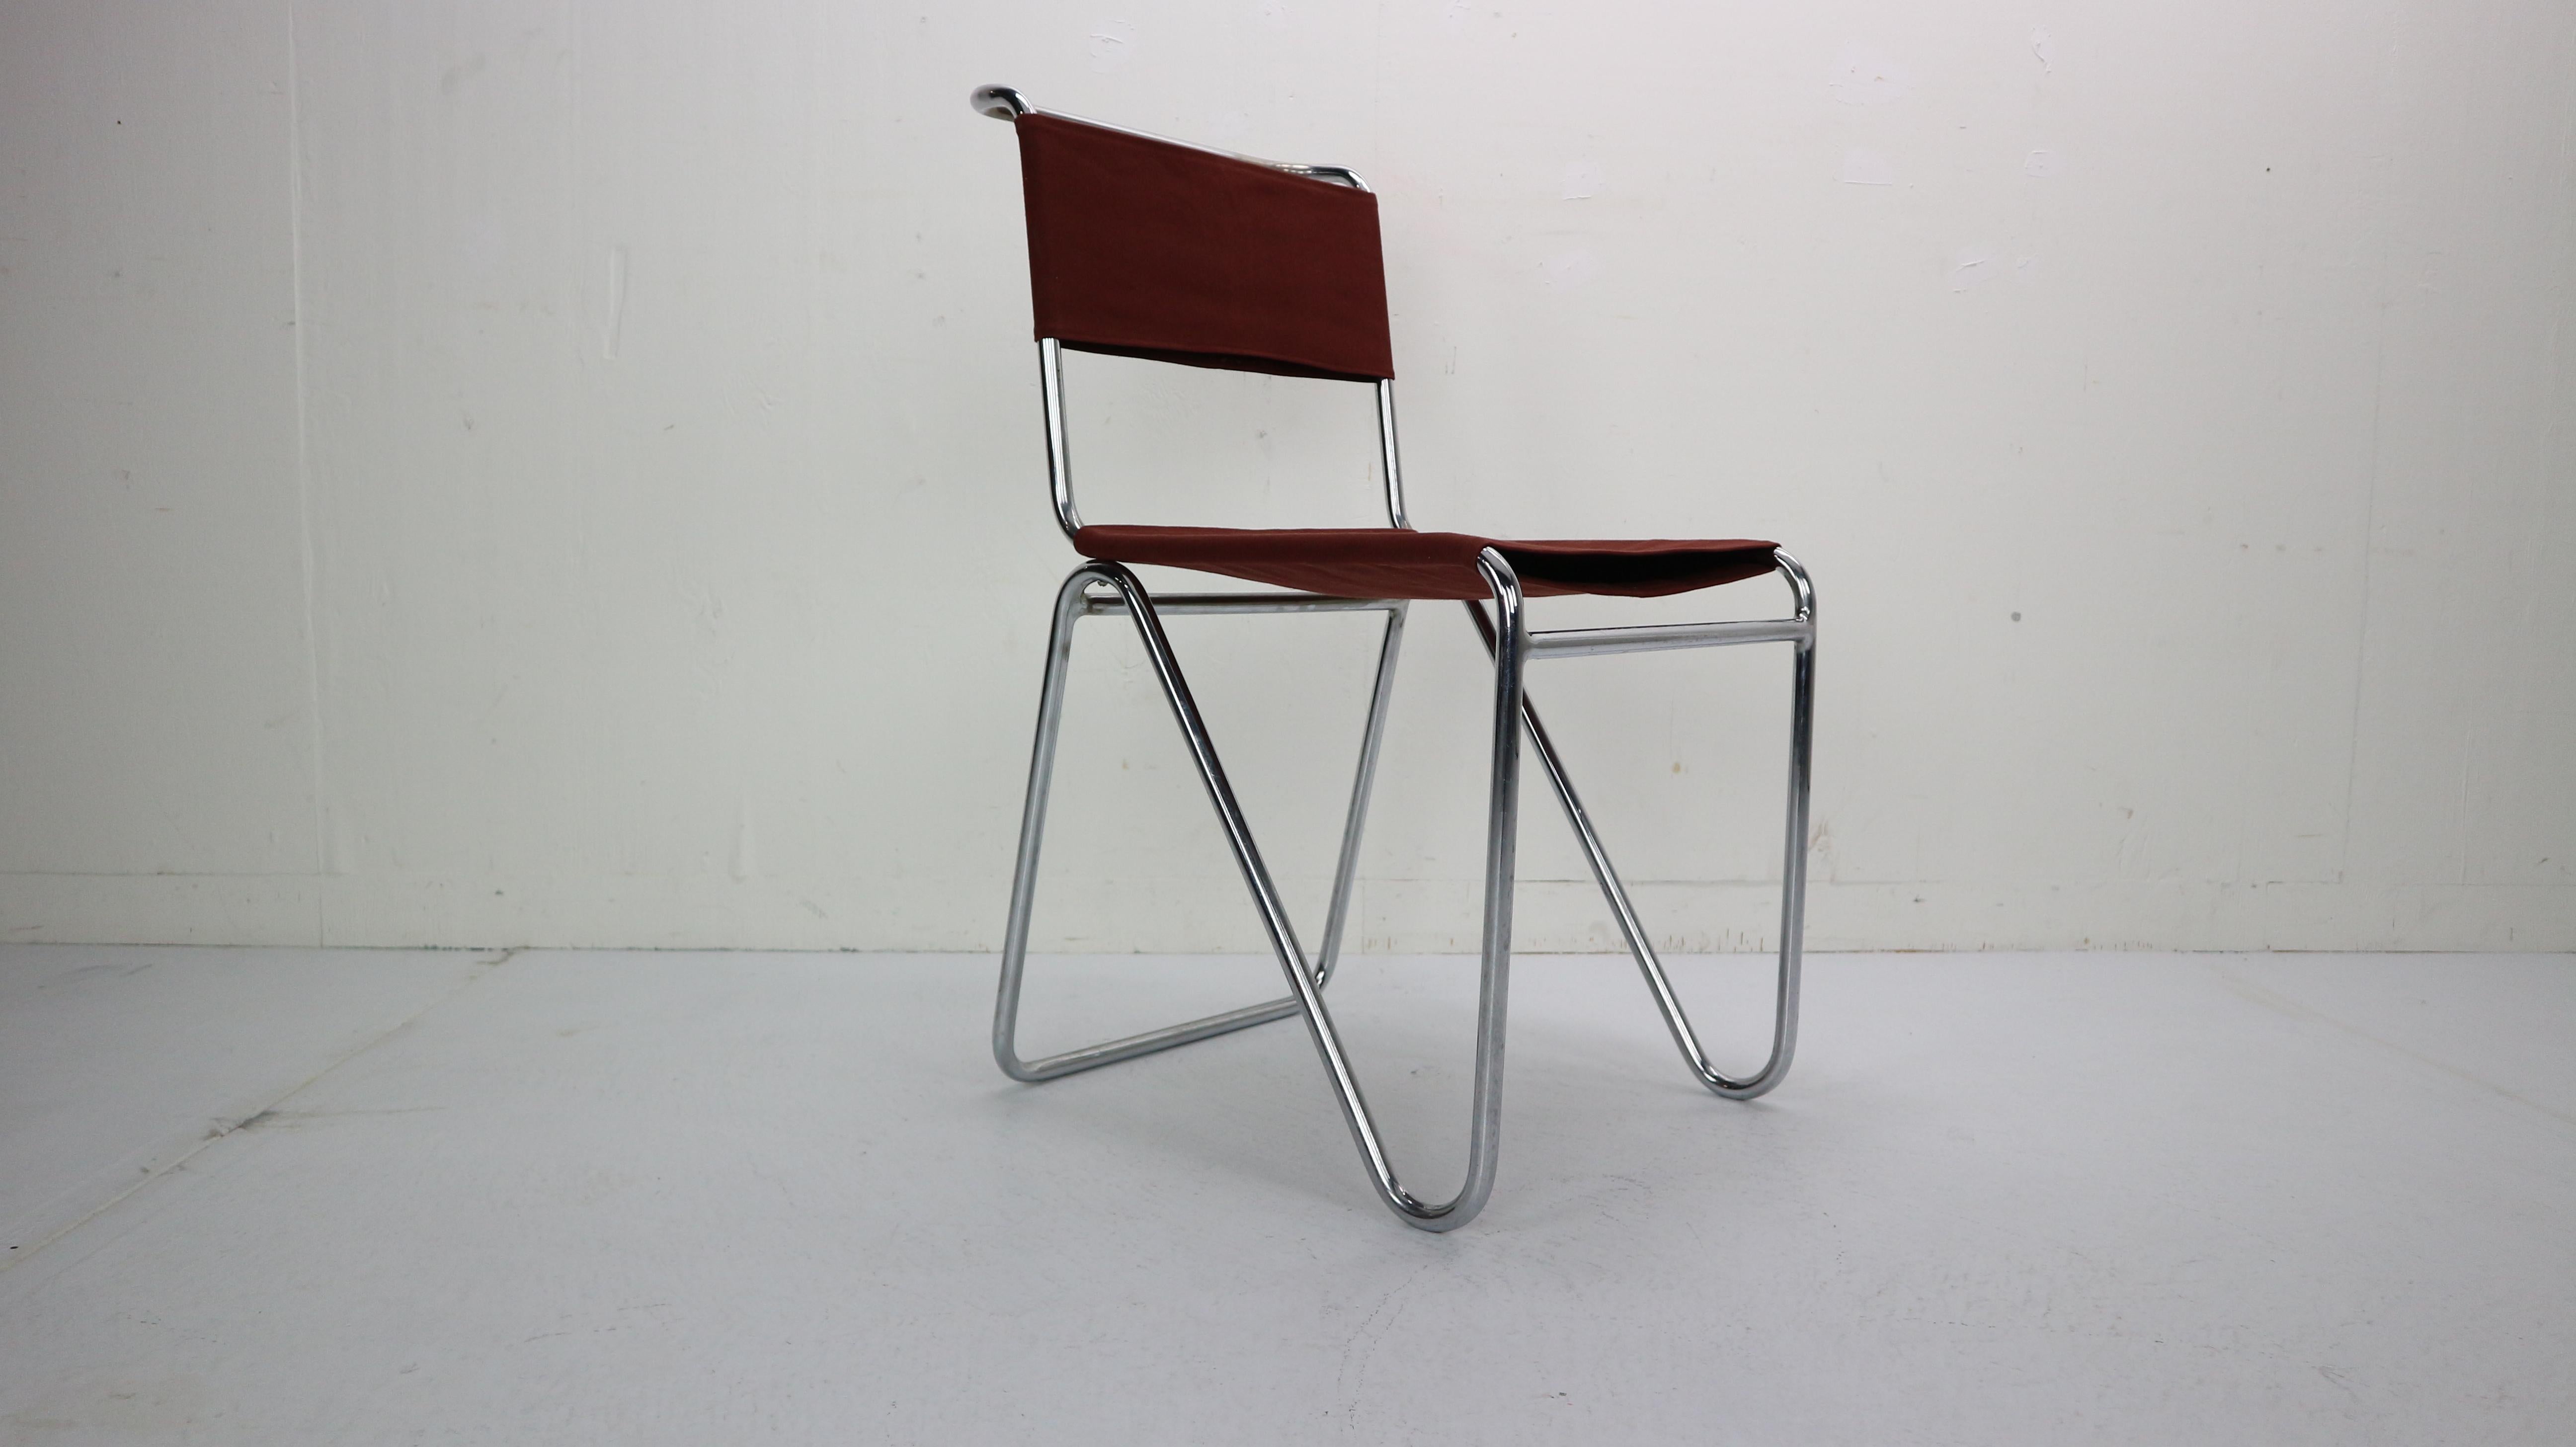 Minimalistic Dutch design chair designed by W.H. Gispen for Gispen Culemborg manufactured in 1930s, Netherlands.
Model number- 102.
Tubular curved chrome base with newly upholstered dark red canvas fabric.

